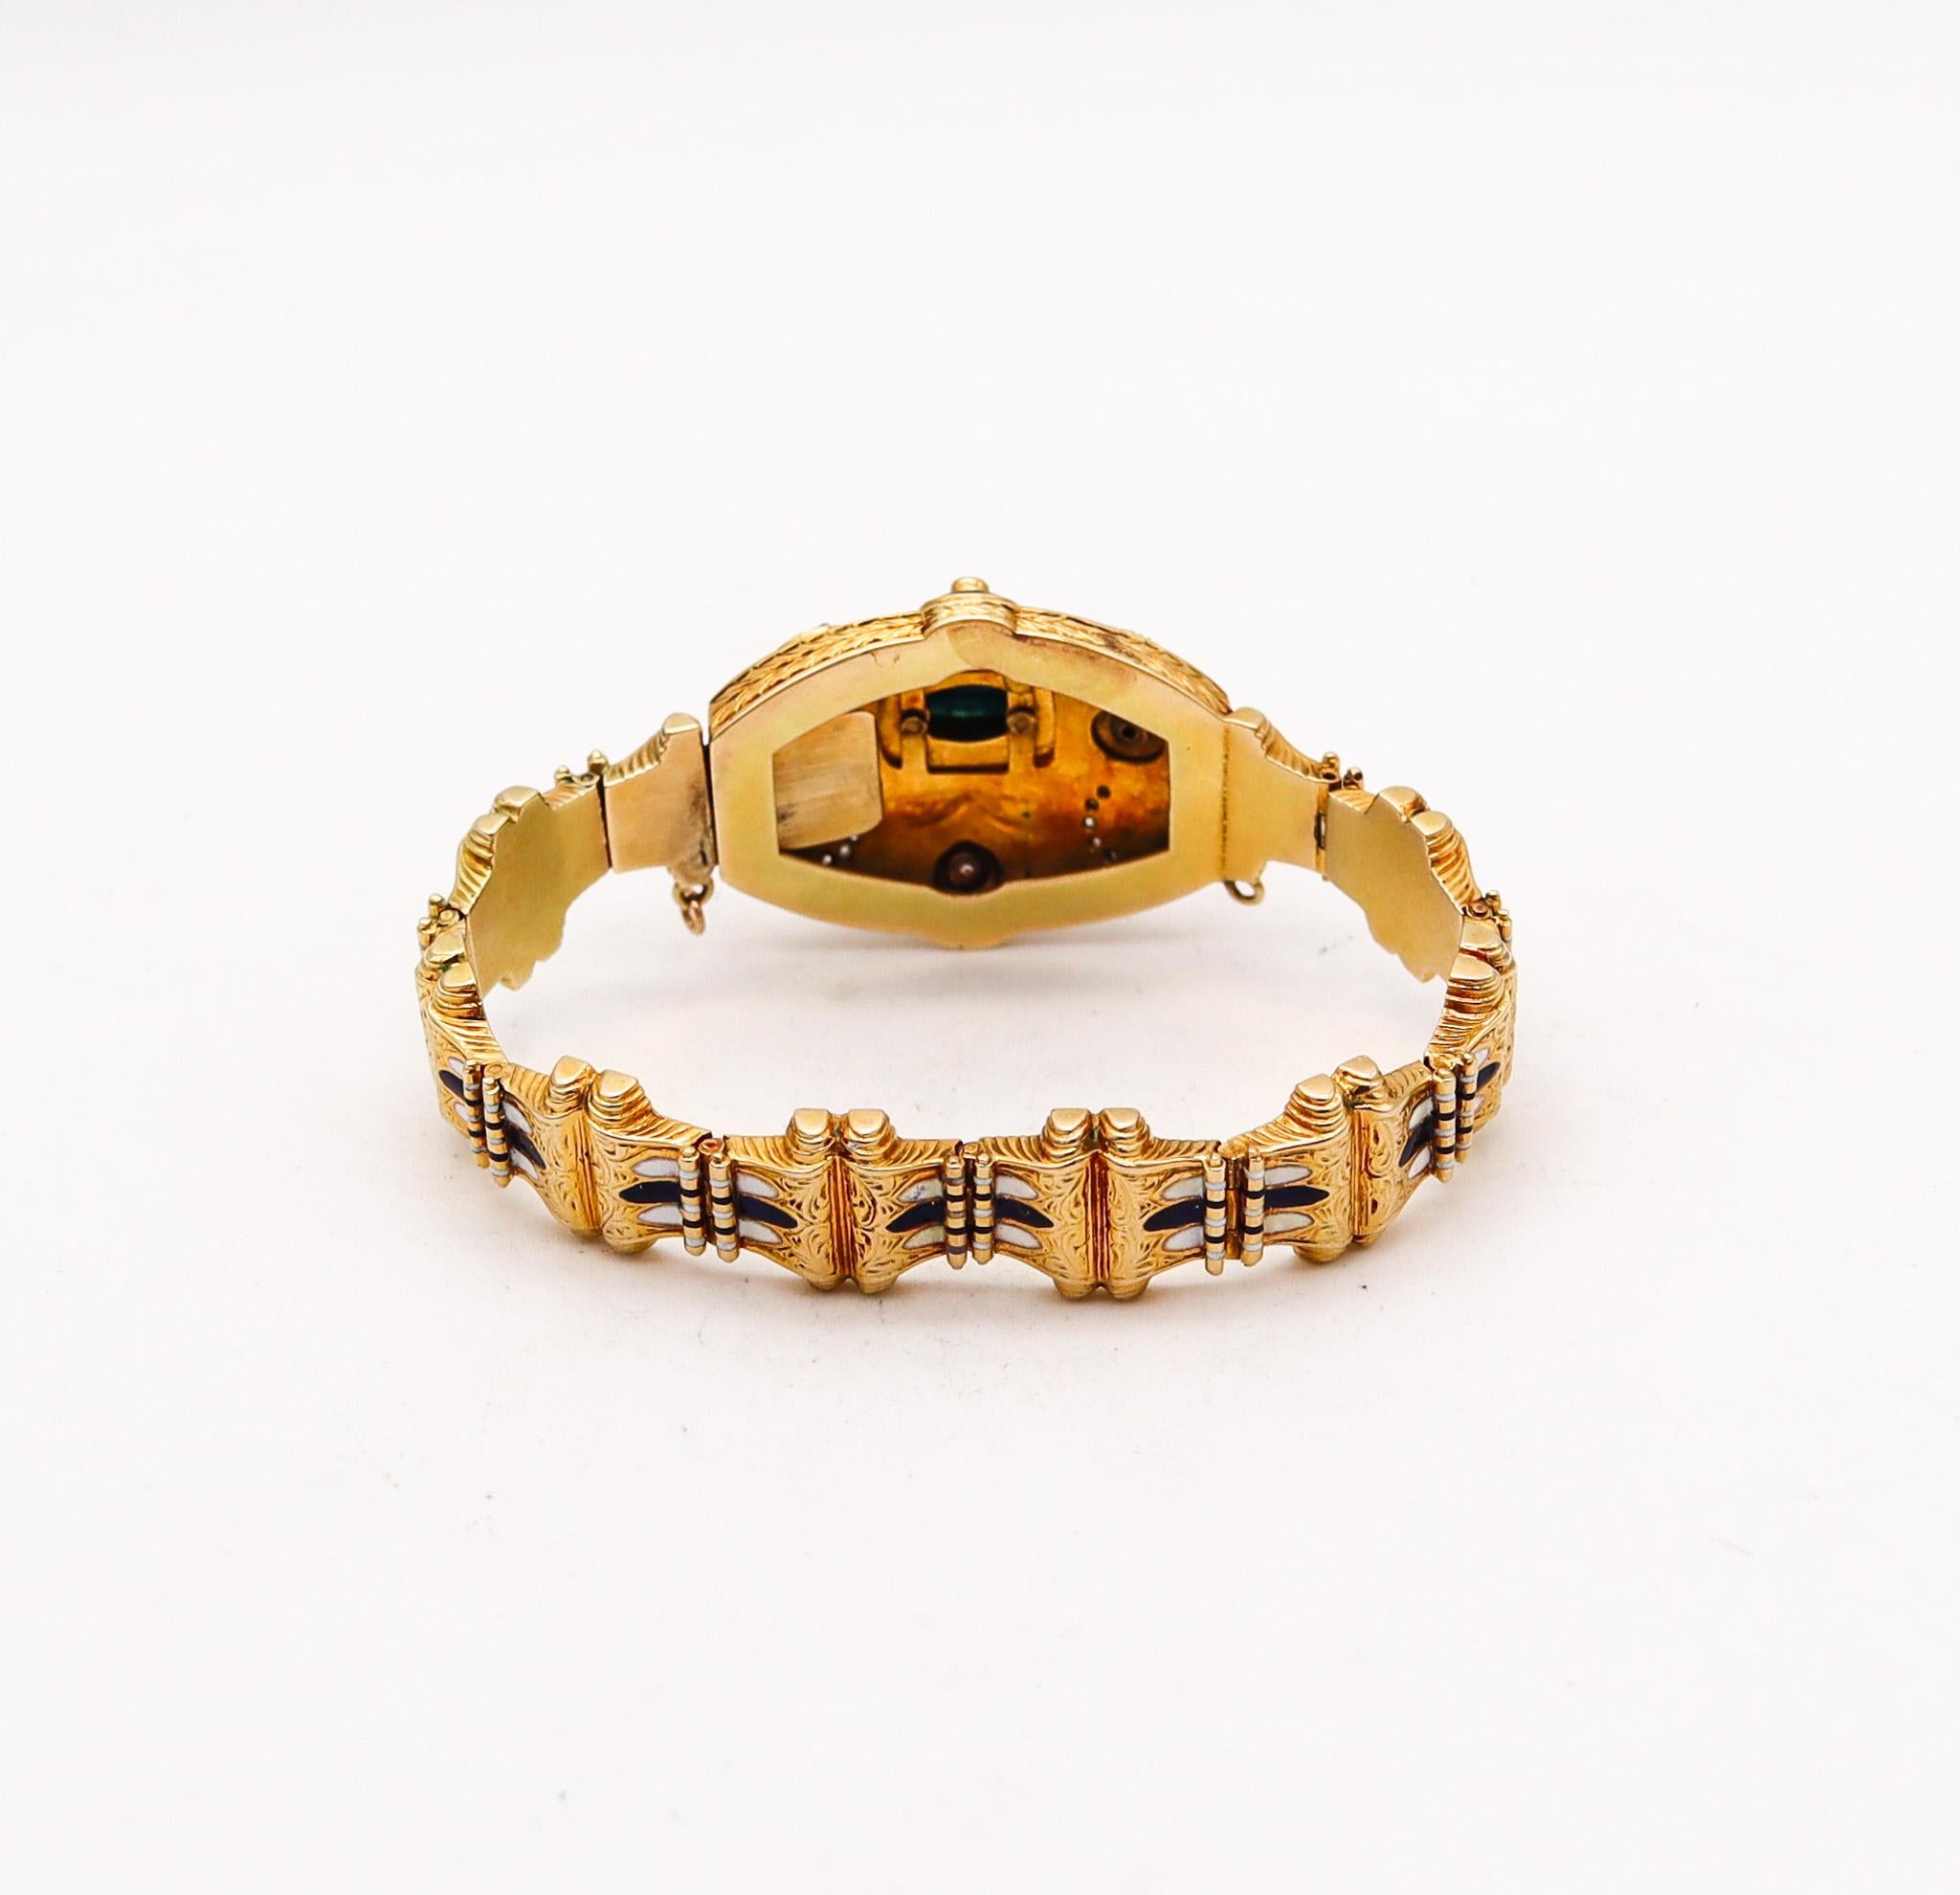 Edwardian 1900 Enameled Bracelet In 18Kt Yellow Gold With Sapphires And Diamonds In Excellent Condition For Sale In Miami, FL